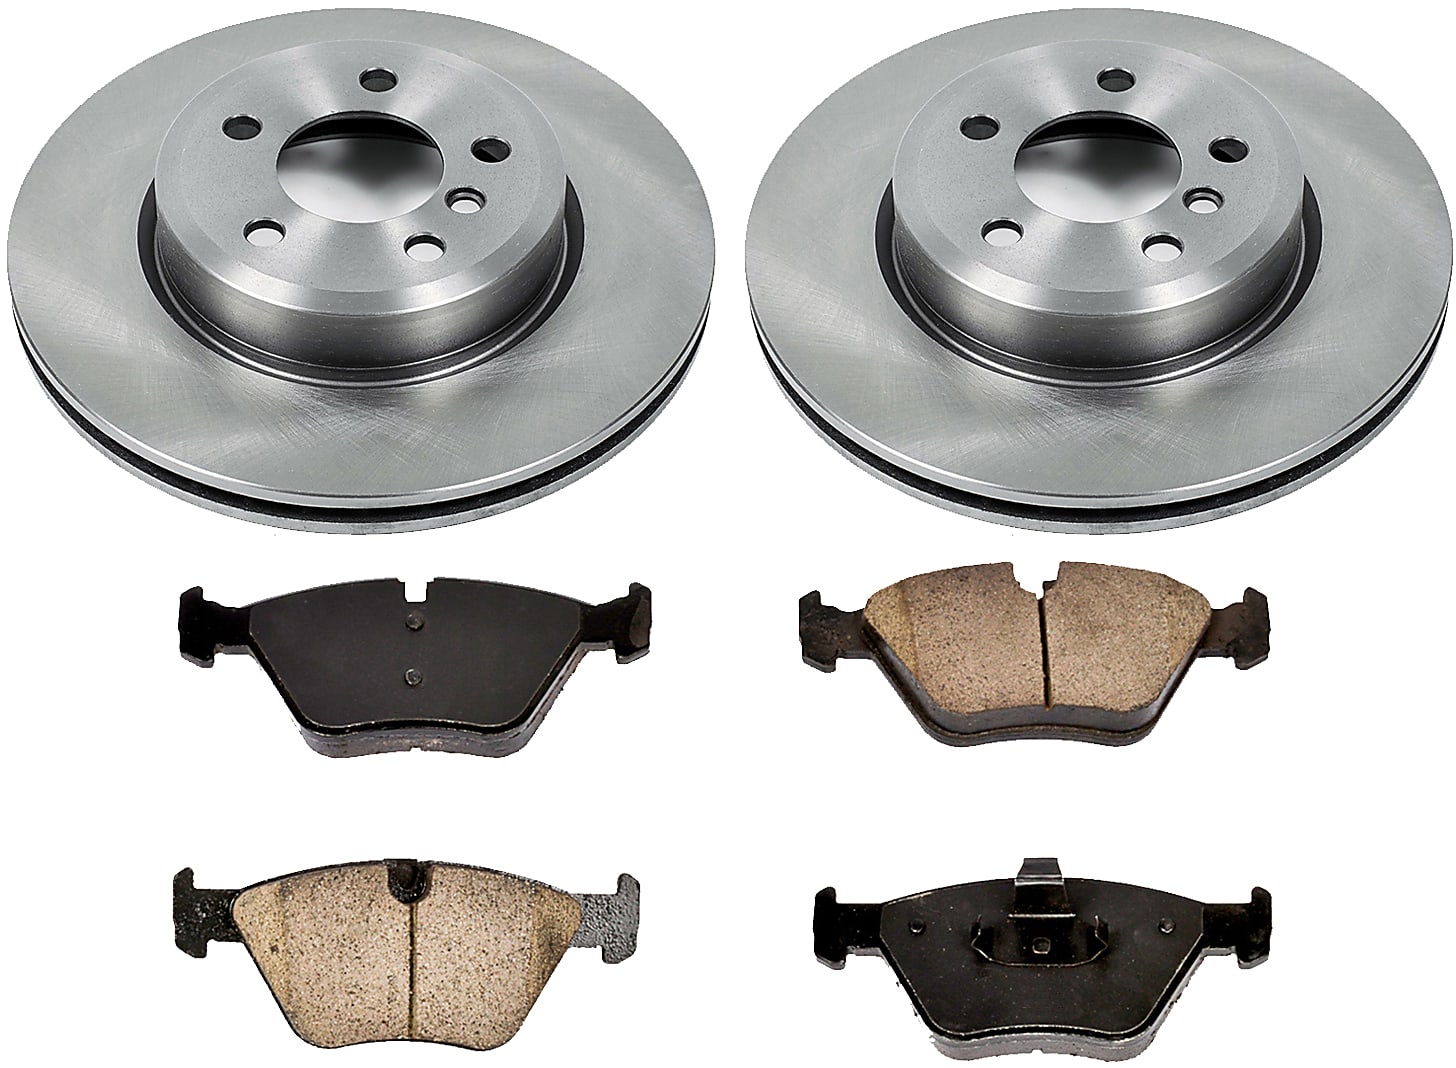 K5298 Powerstop Brake Disc and Pad Kits 2-Wheel Set Front New for E83 X3 Series